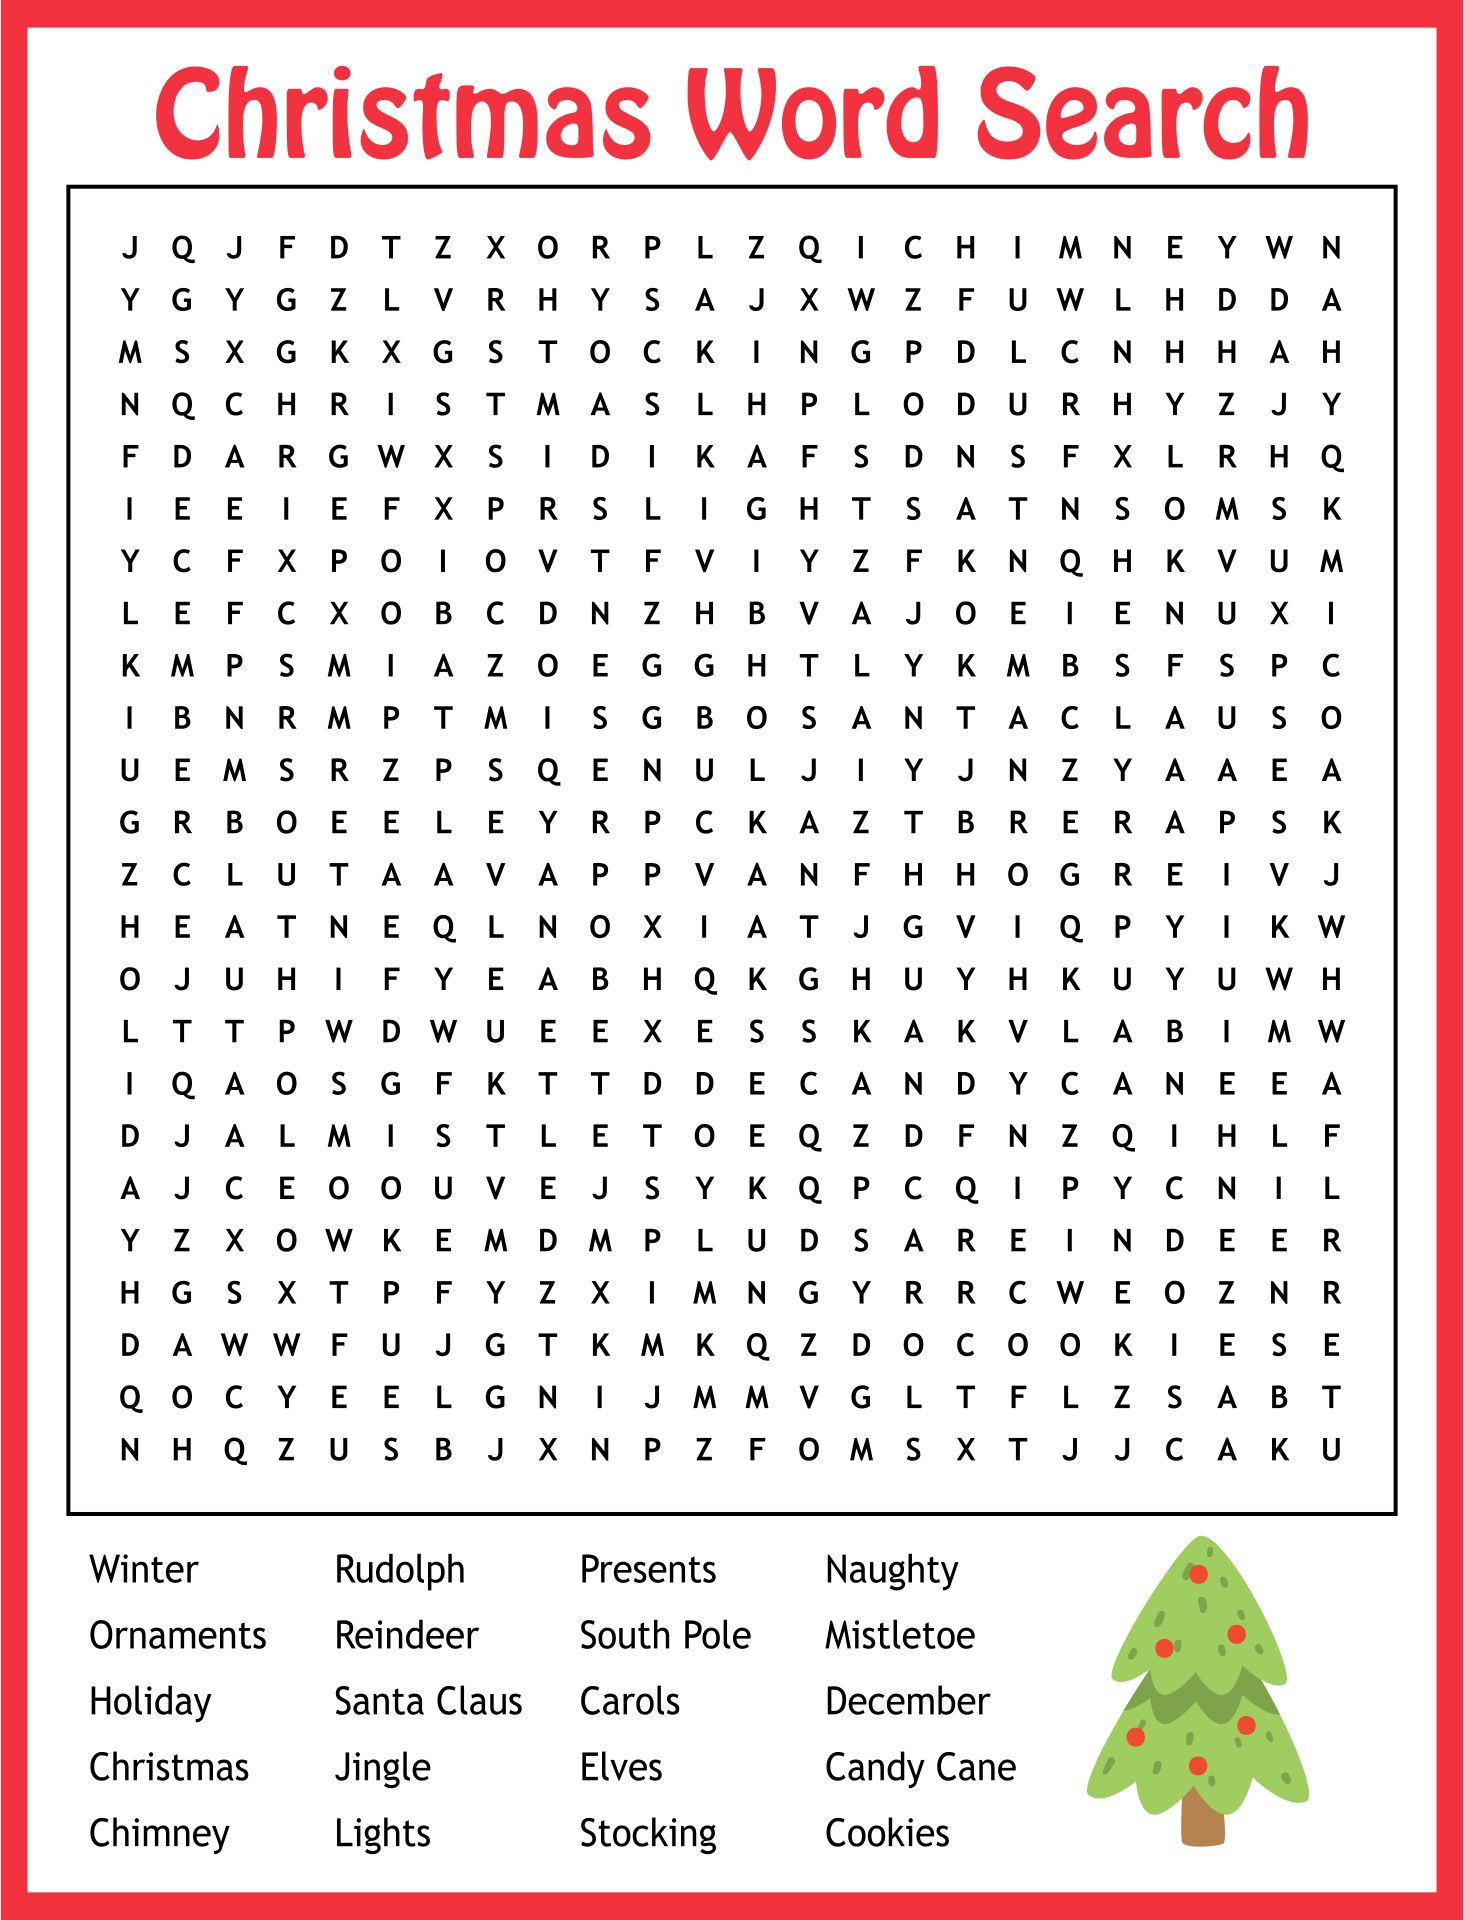 Christmas Season - Large Print Word Search Puzzle